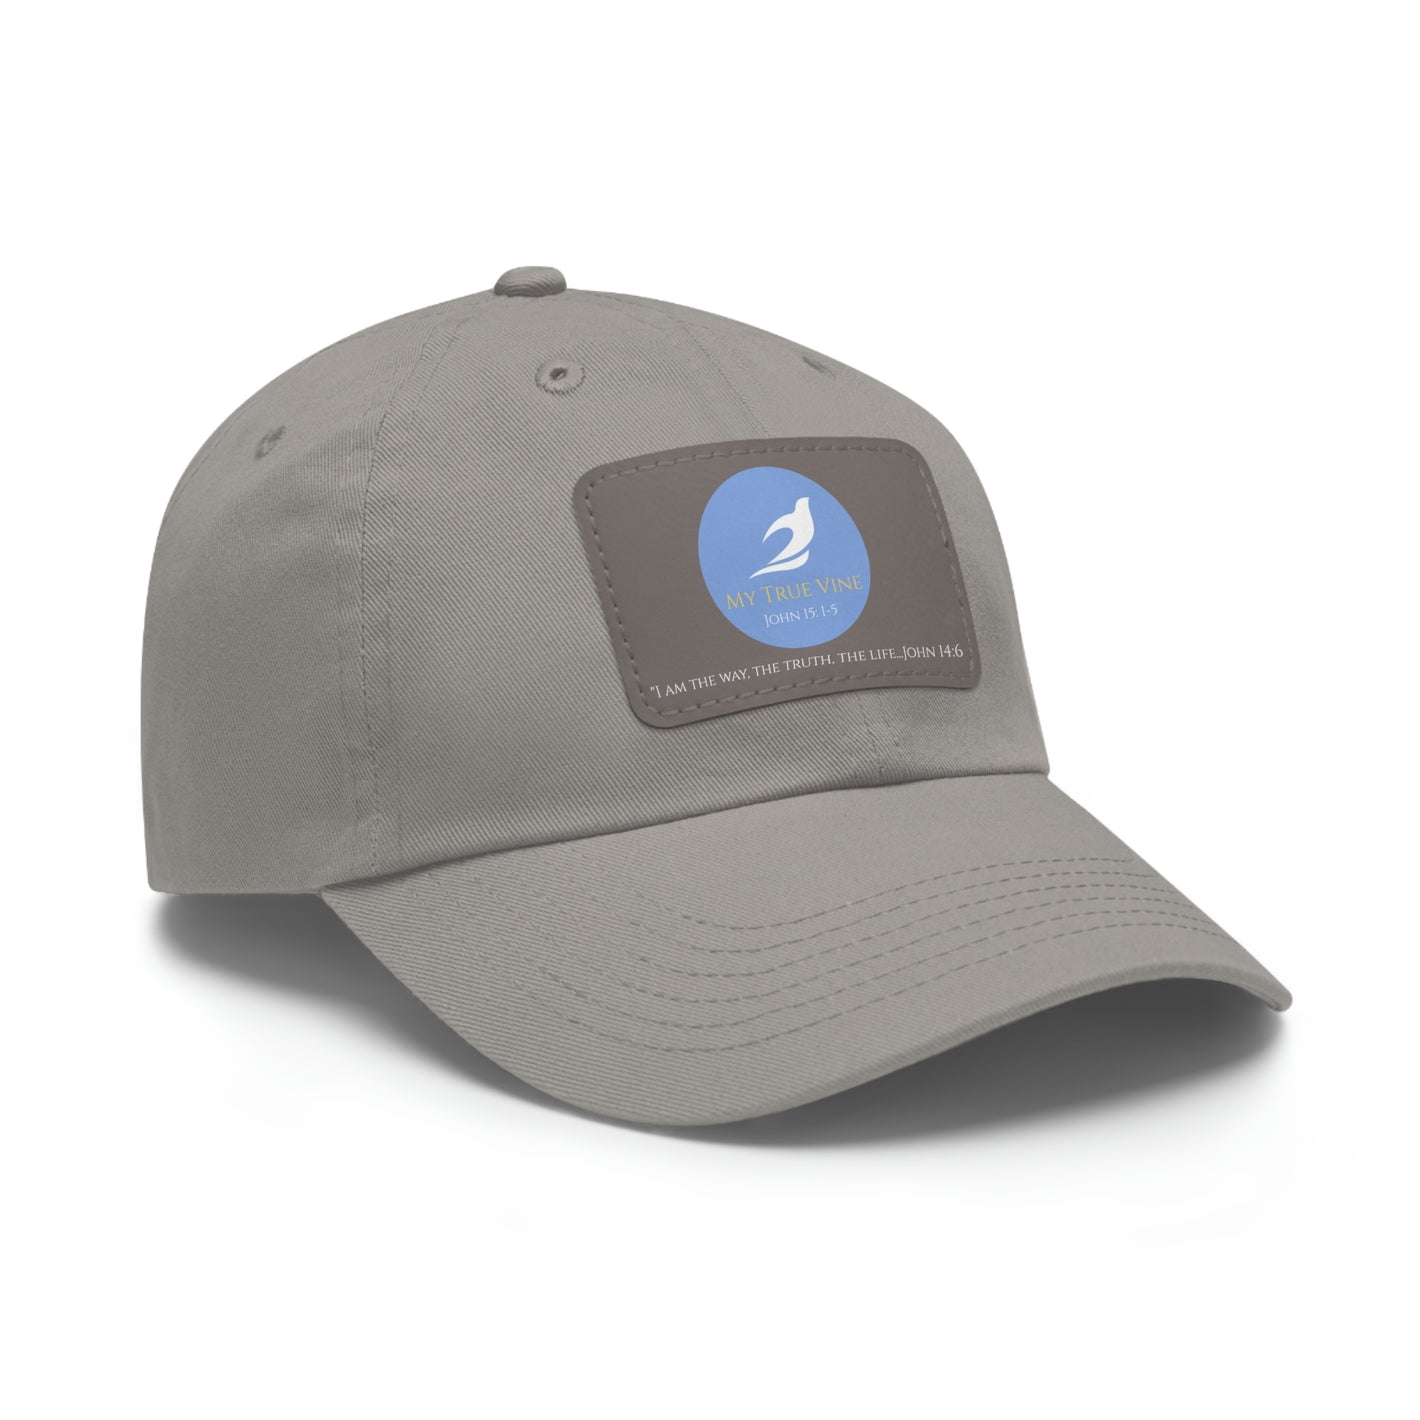 High quality baseball cap with a faux leather patch and My True Vine logo. 